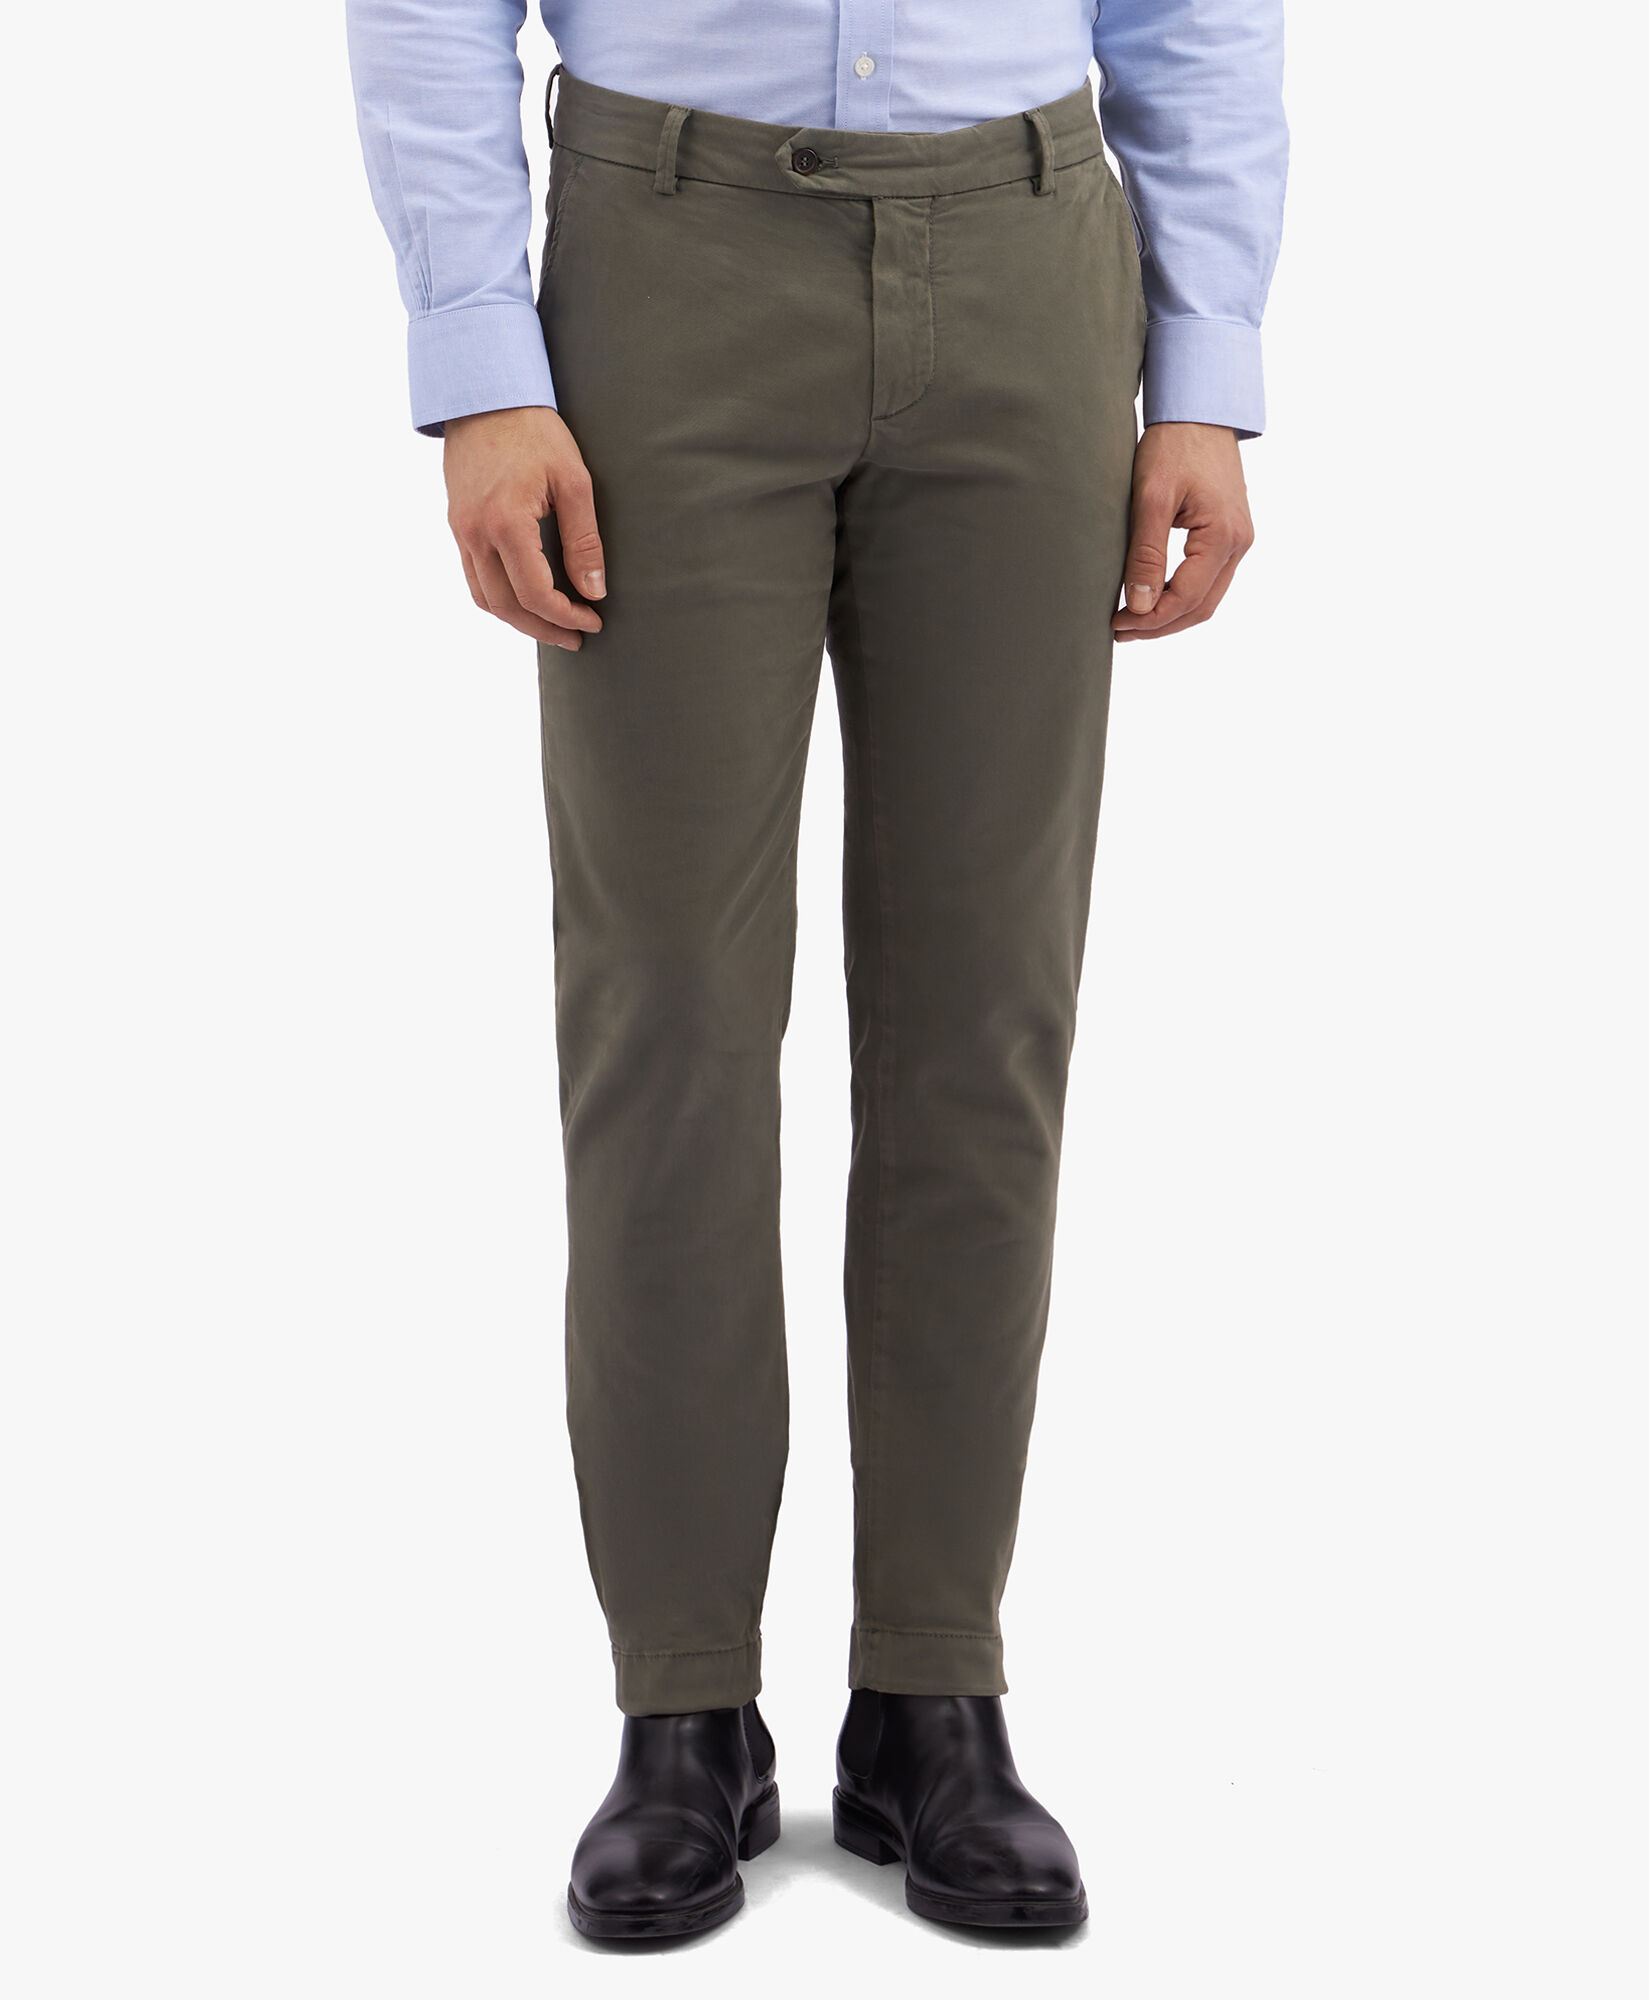 Men's Clothes & Accessories - American Design | Brooks Brothers®